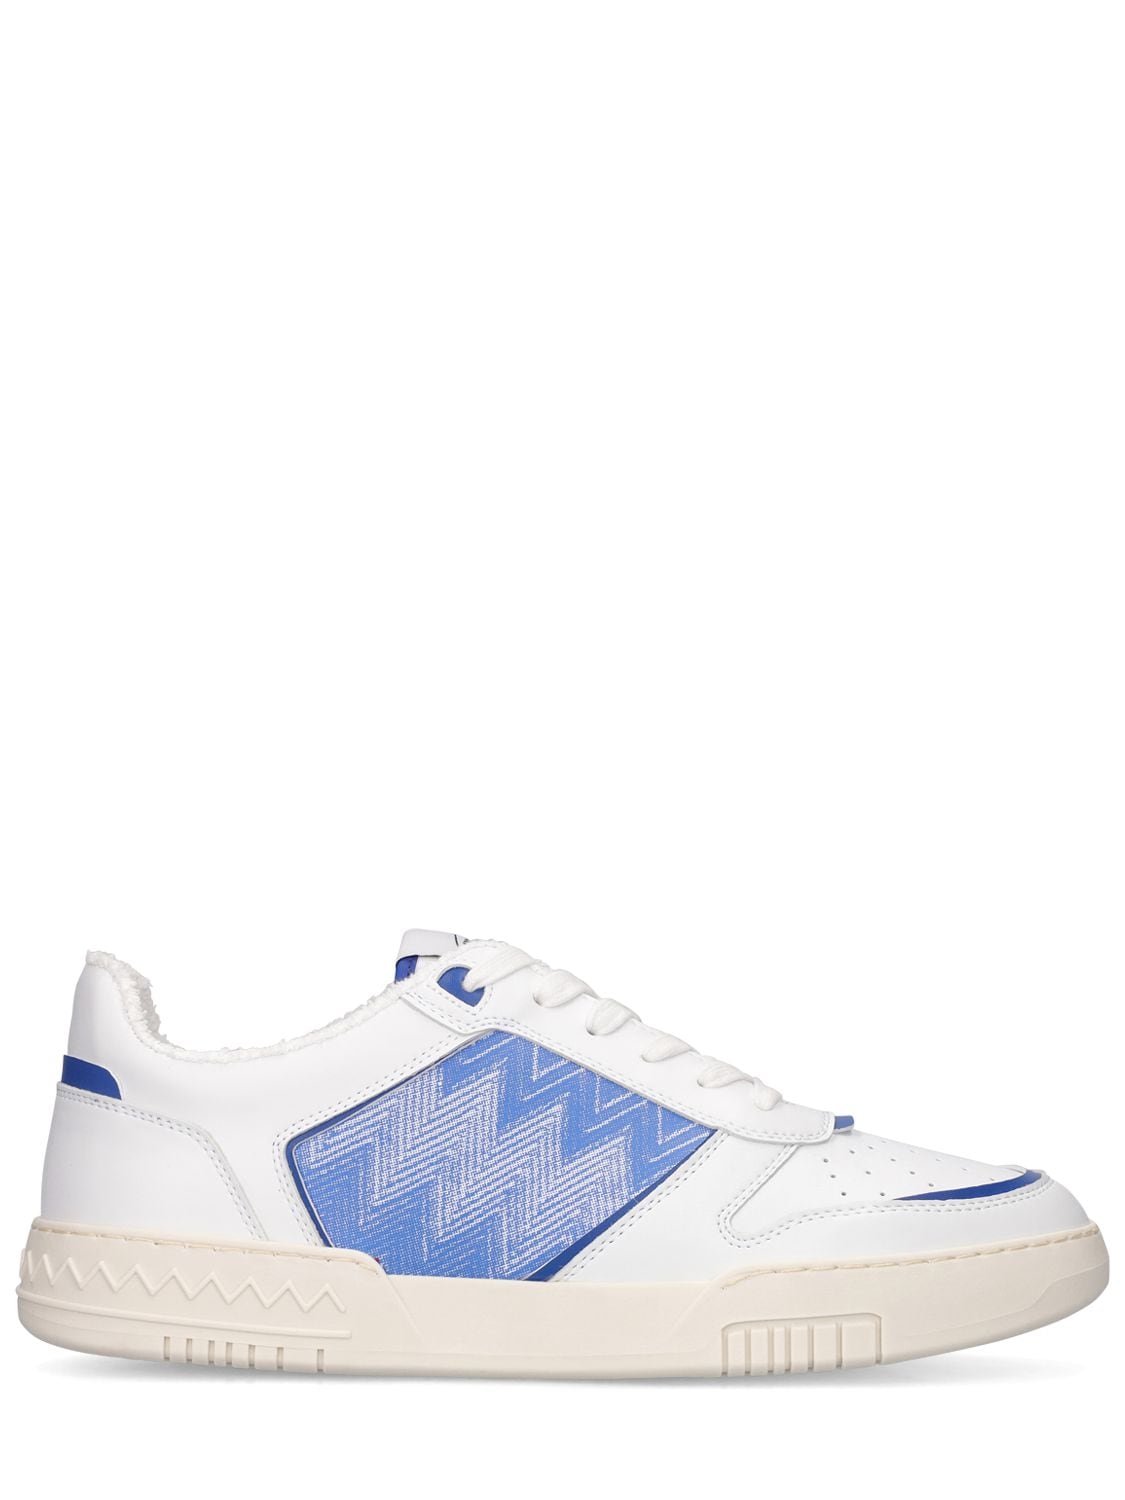 Missoni Basket New Low Sneakers In White,blue